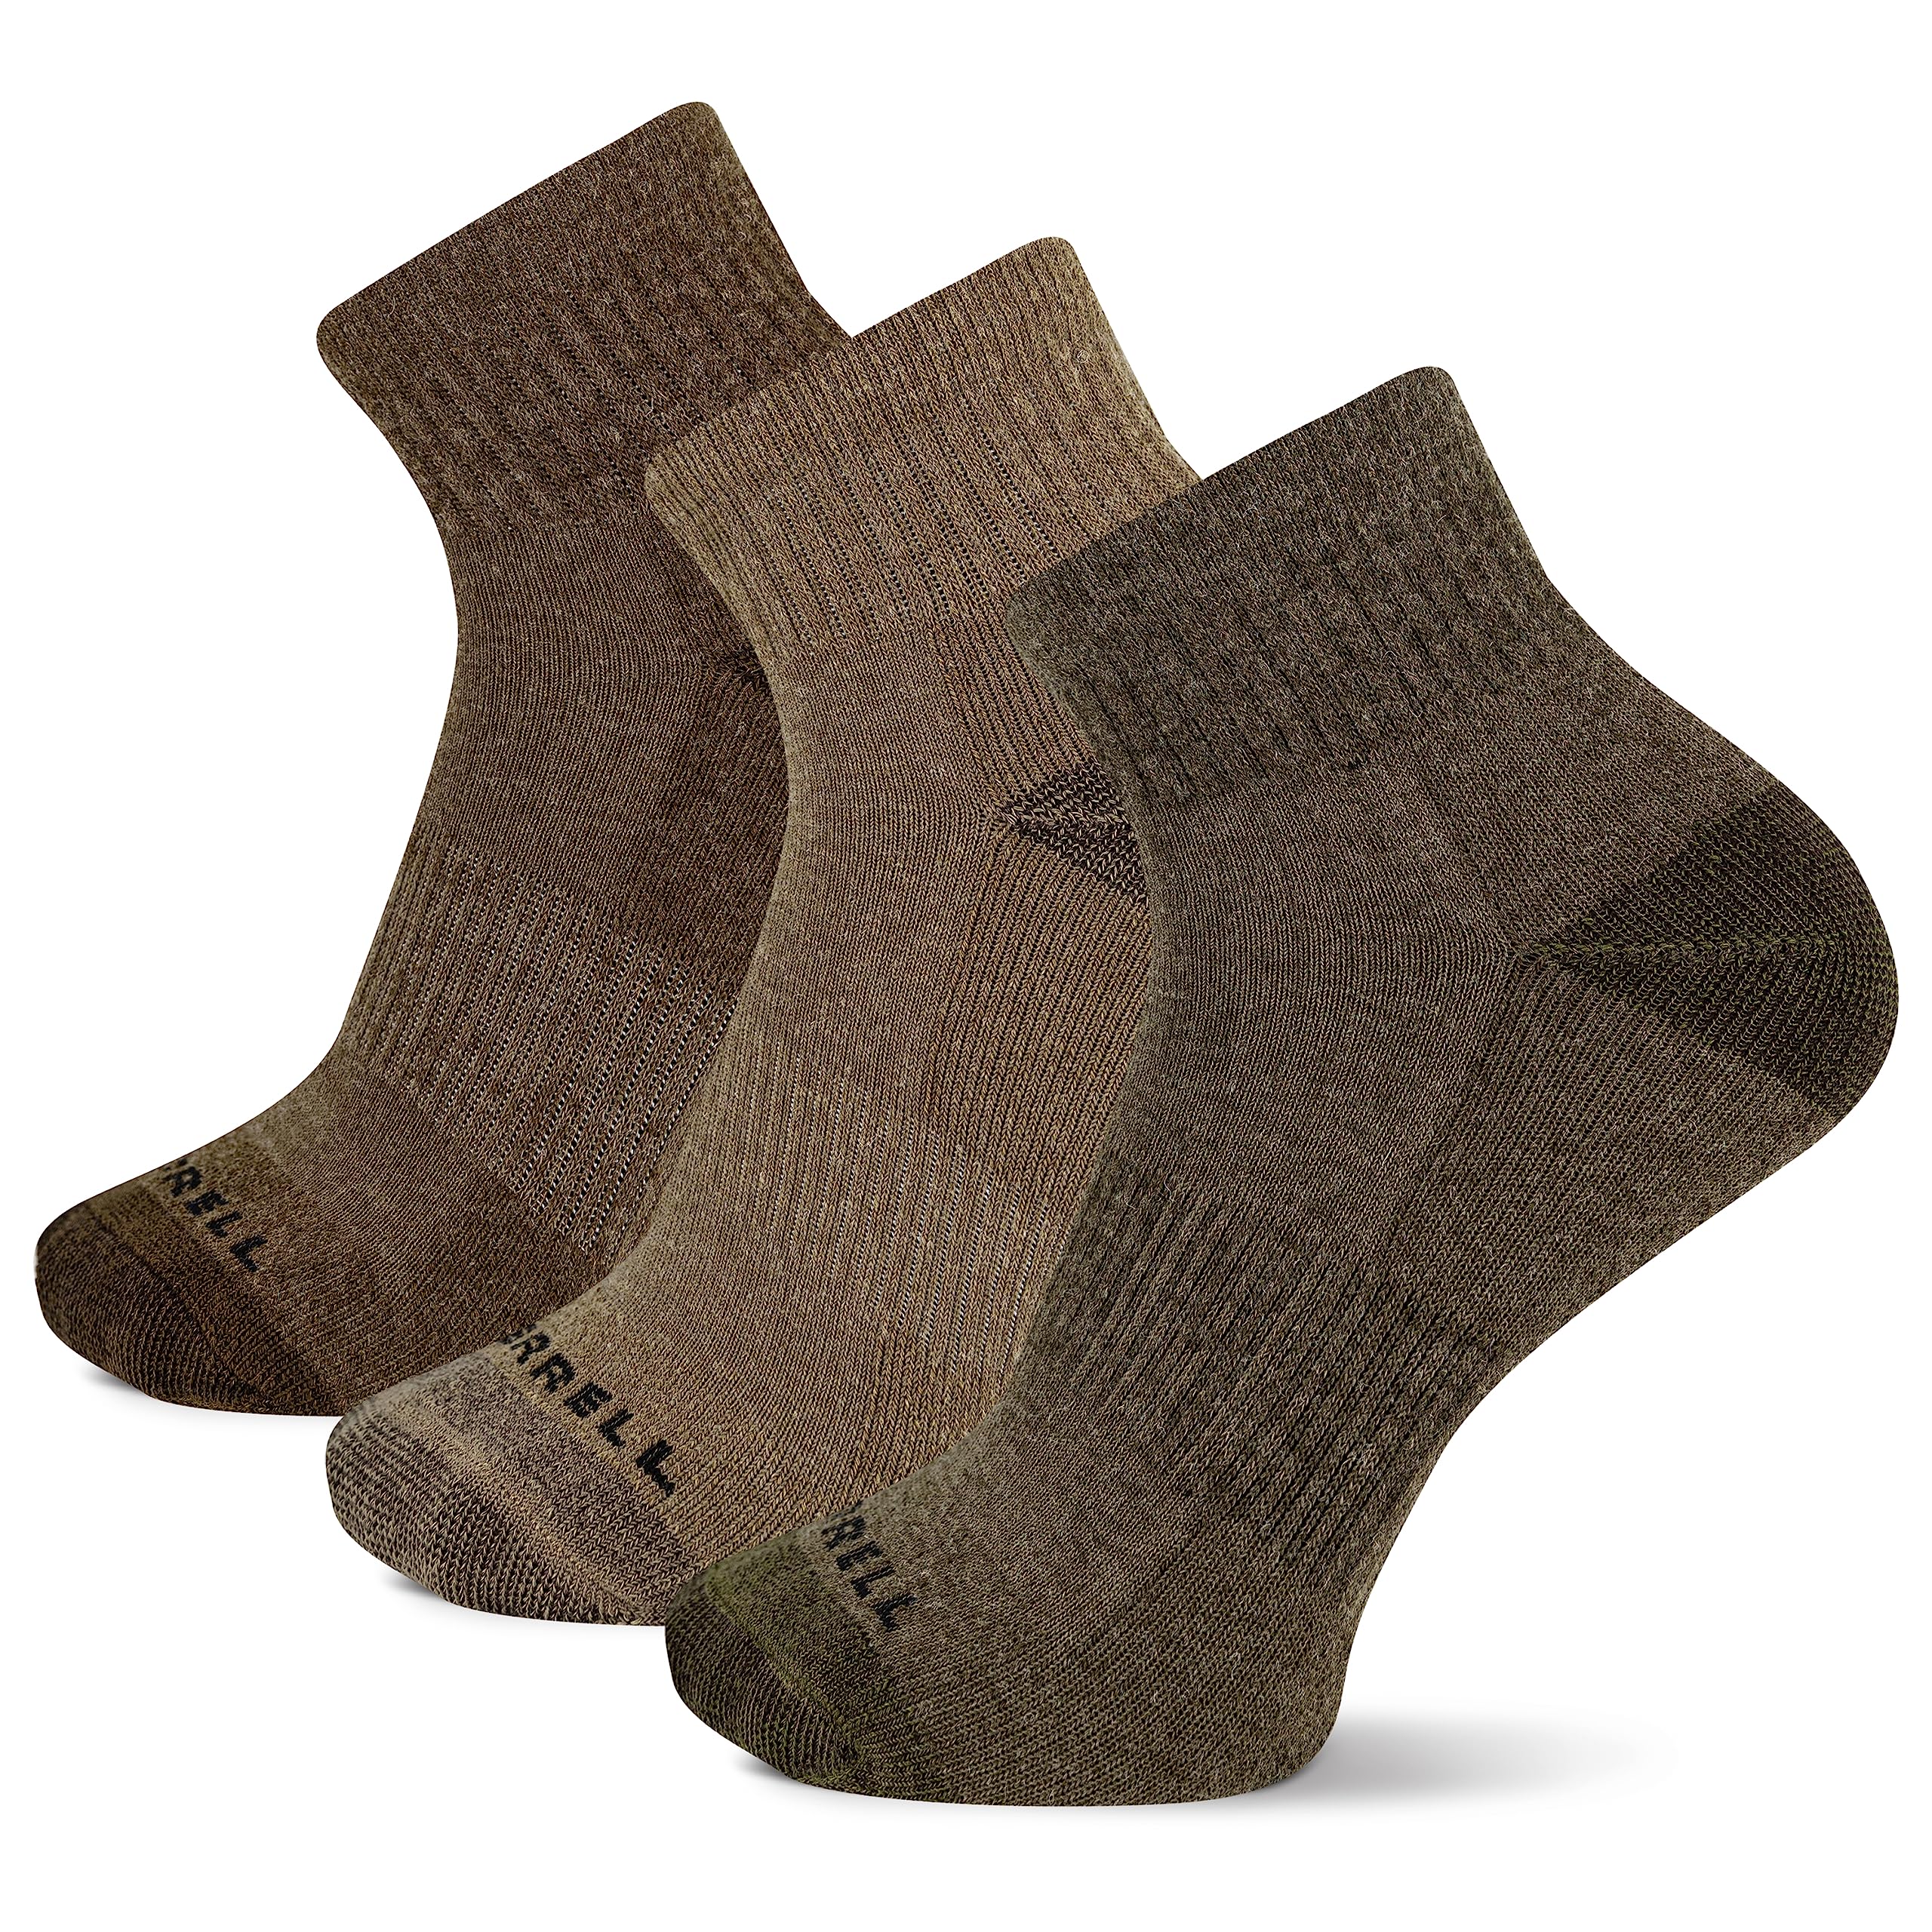 Merrell Men's and Women's Wool Everyday Hiking Socks - 3 Pair Pack - Cushion Arch Support & Moisture Wicking